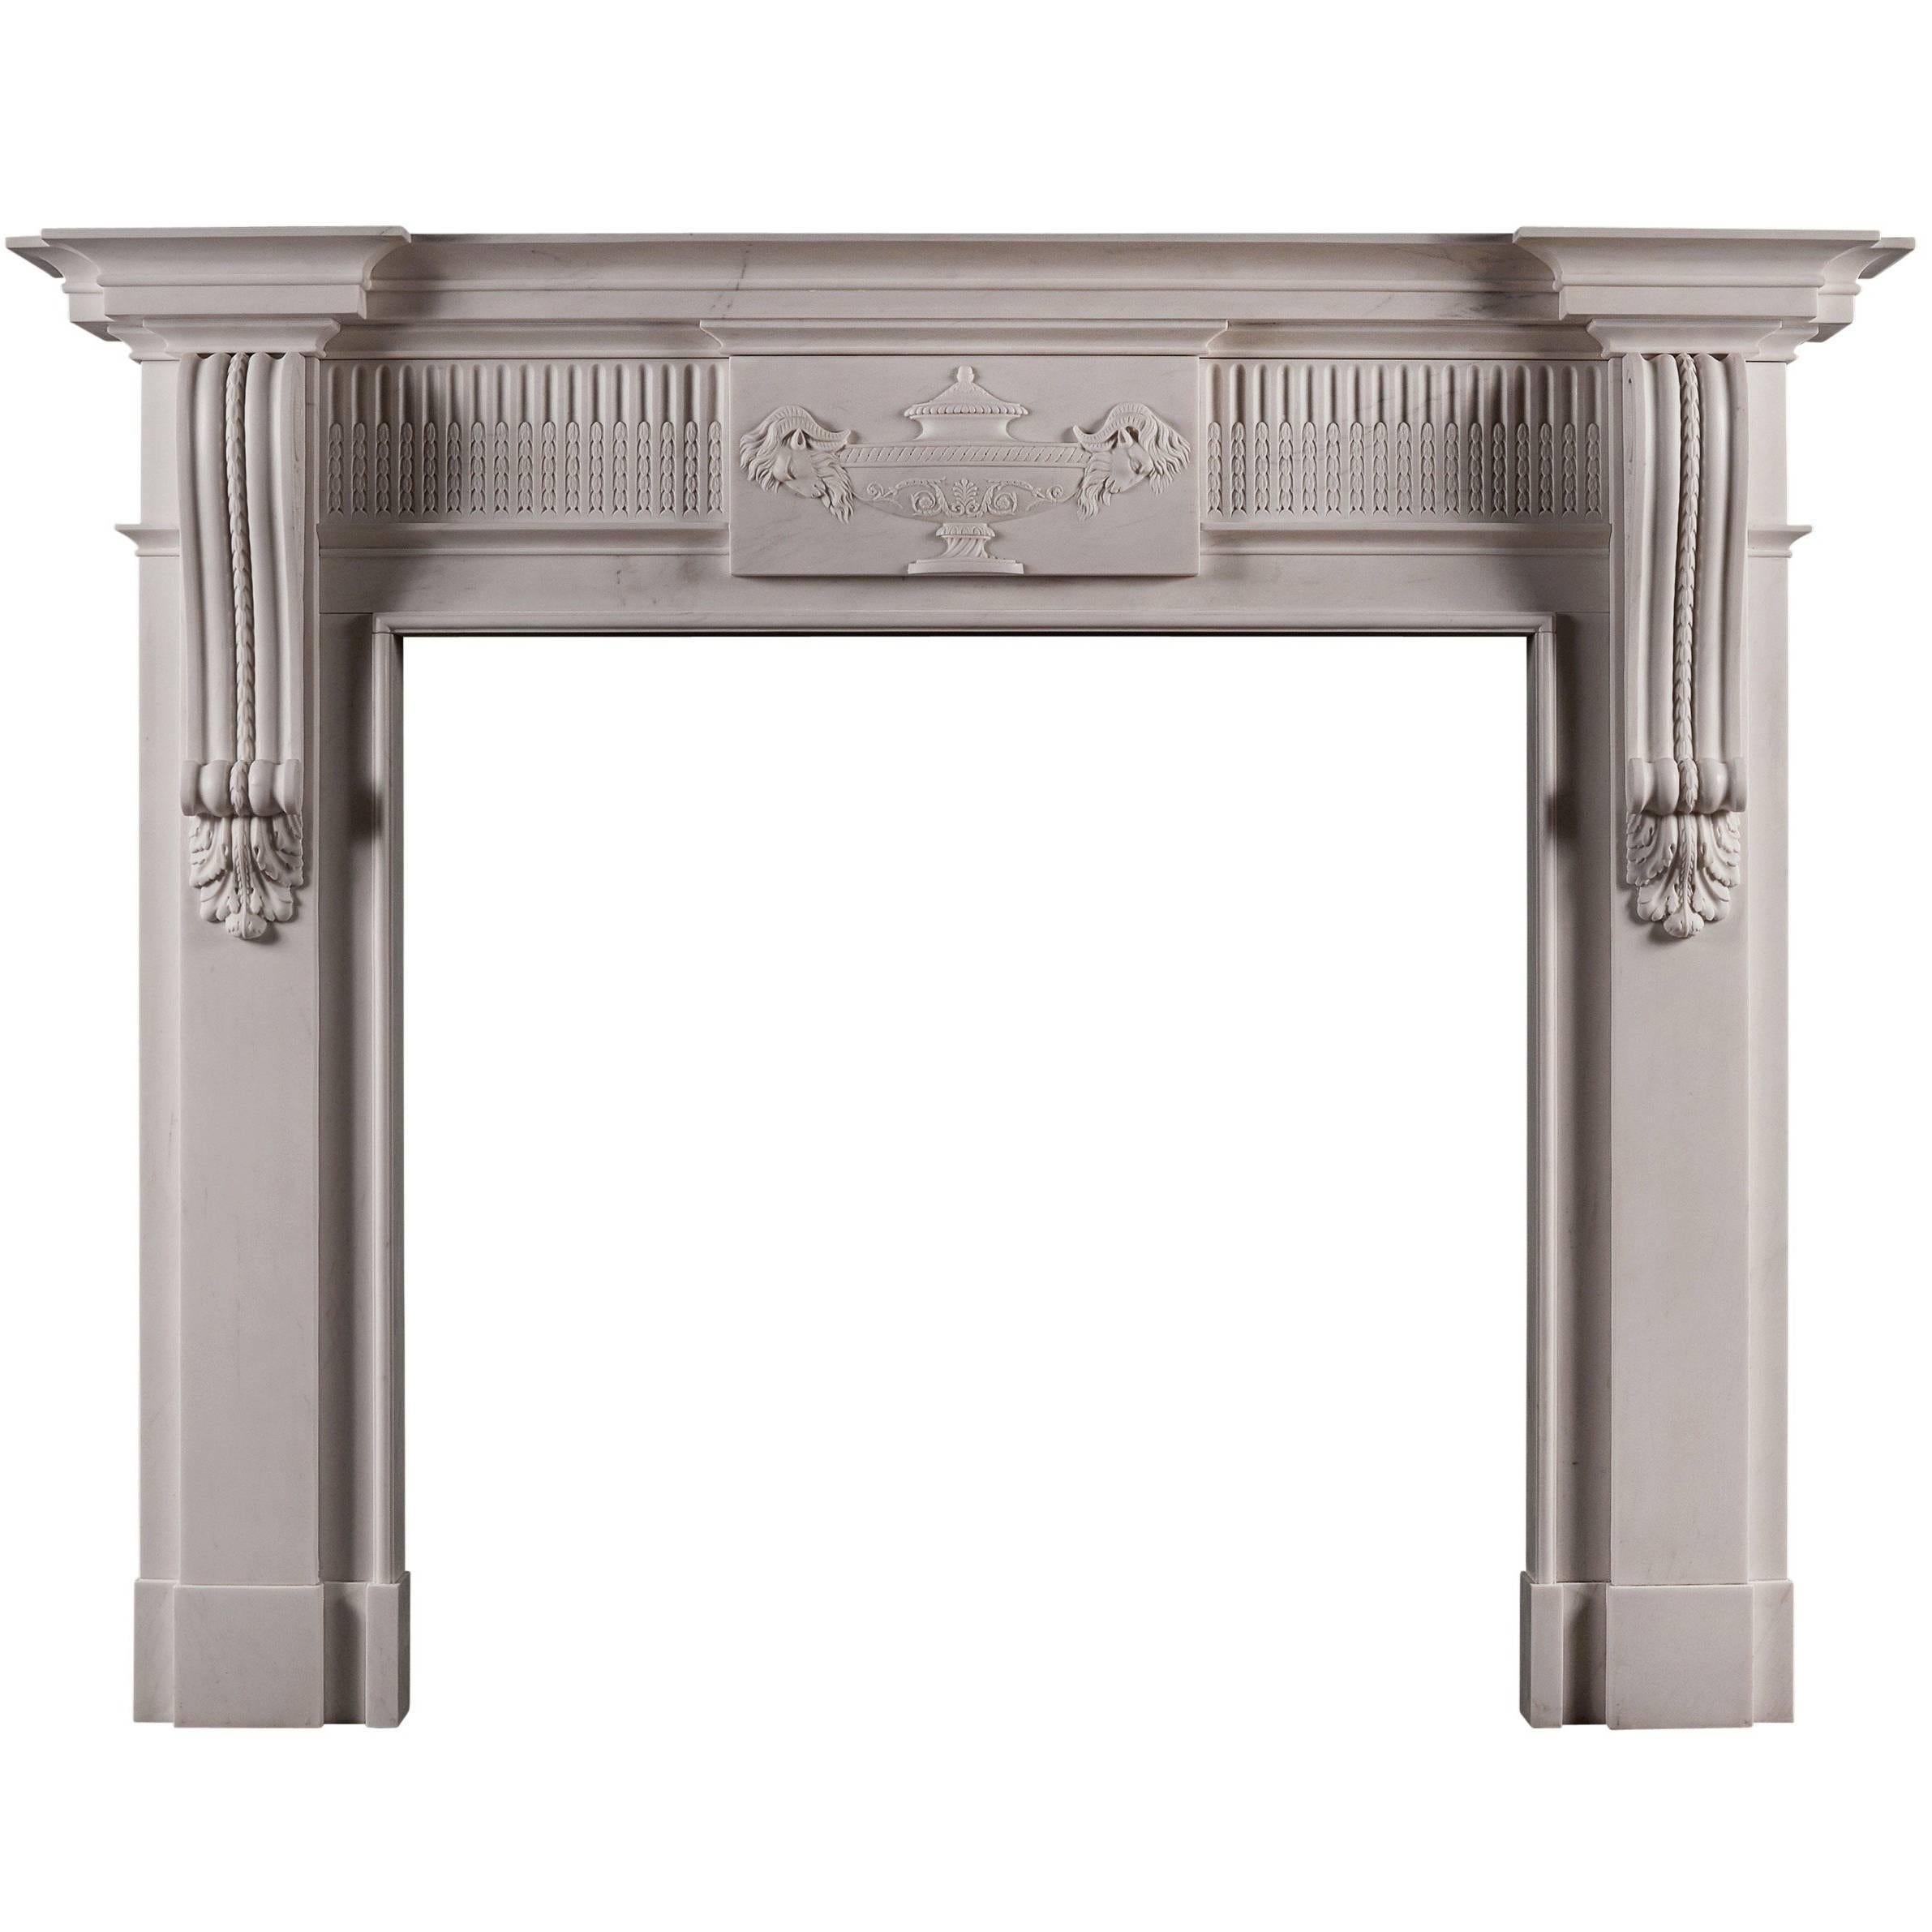 Georgian Style White Marble Fireplace with Carved Brackets